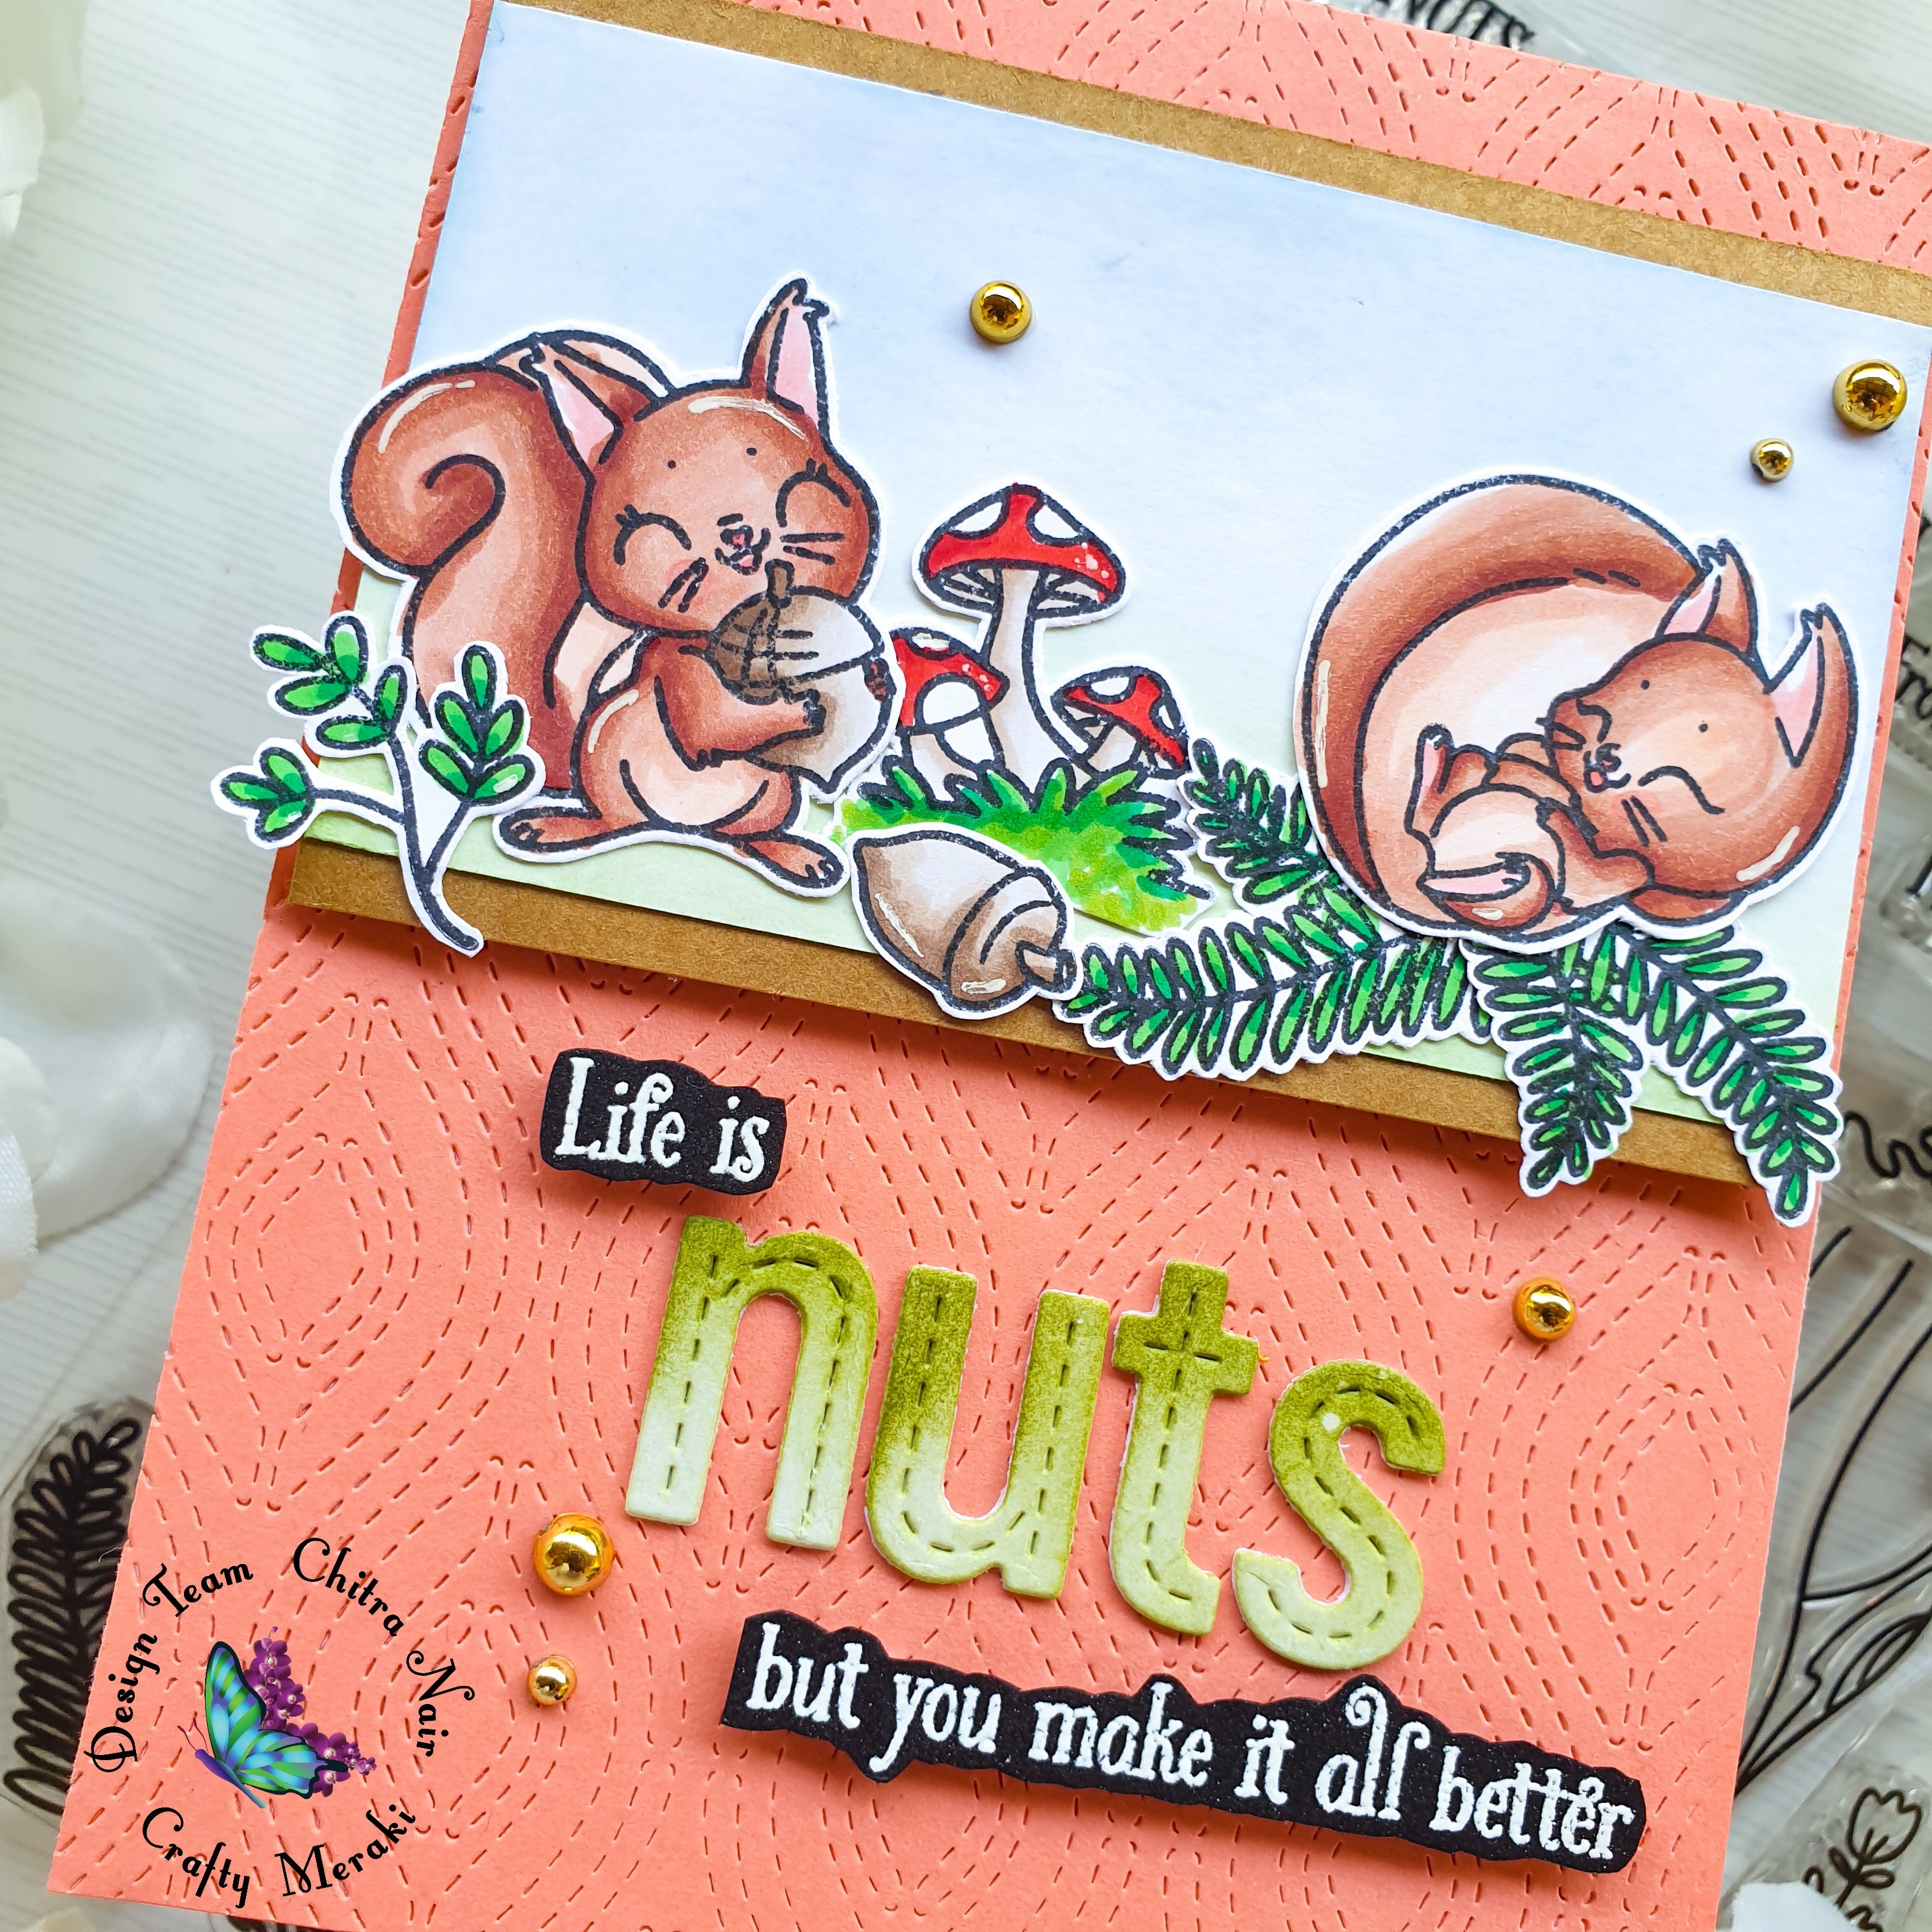 Life is nuts by Chitra